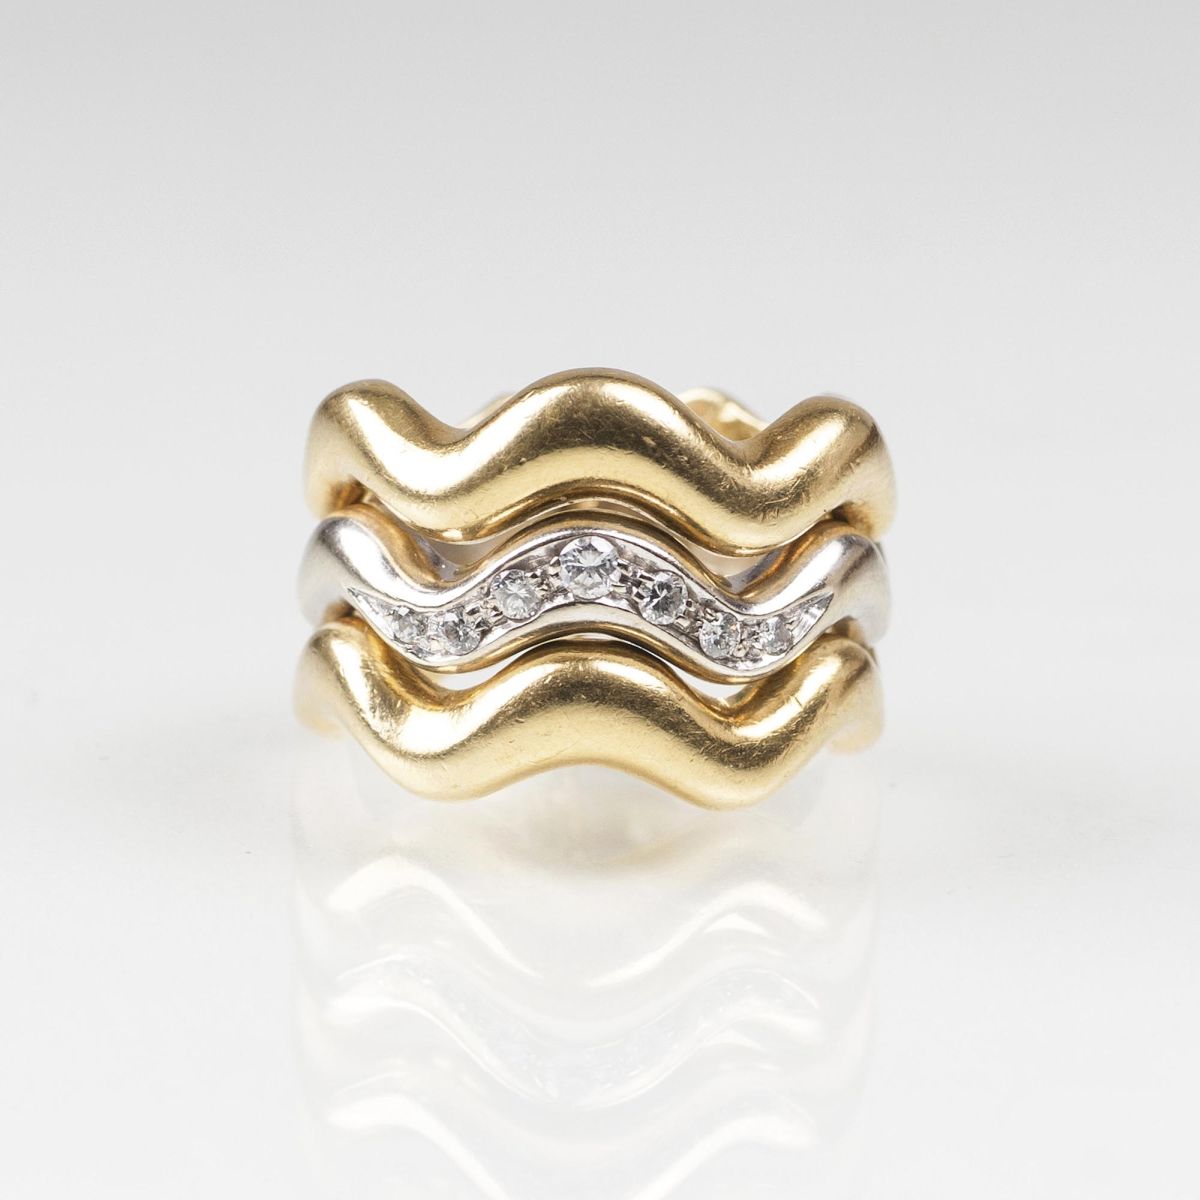 A two-coloured Gold Diamond Ring